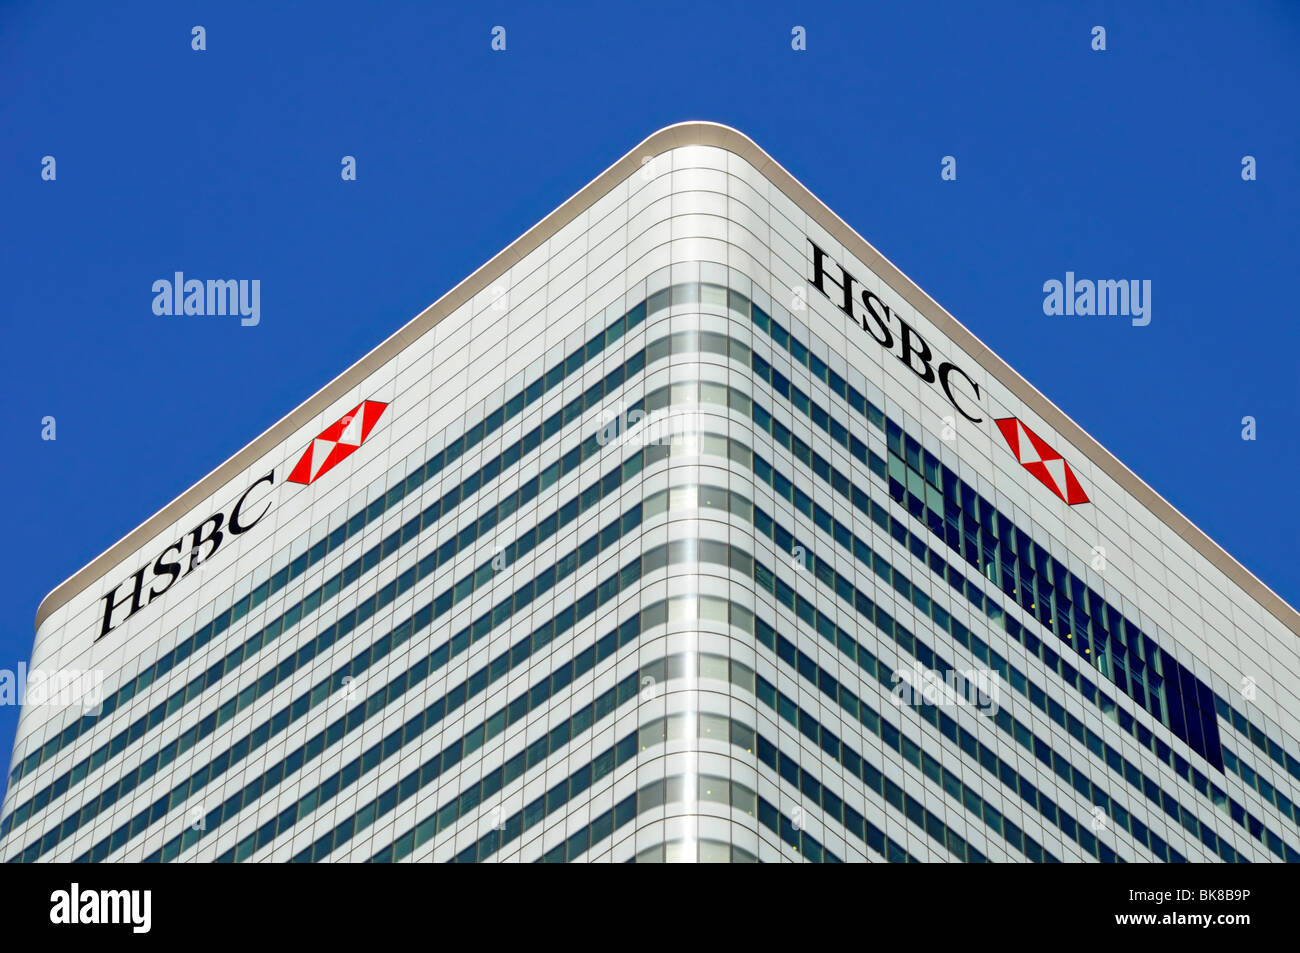 Docklands blue sky corner view of cladding & windows to roof level HSBC bank logo signs at London Docklands Canary Wharf HQ building Tower Hamlets UK Stock Photo